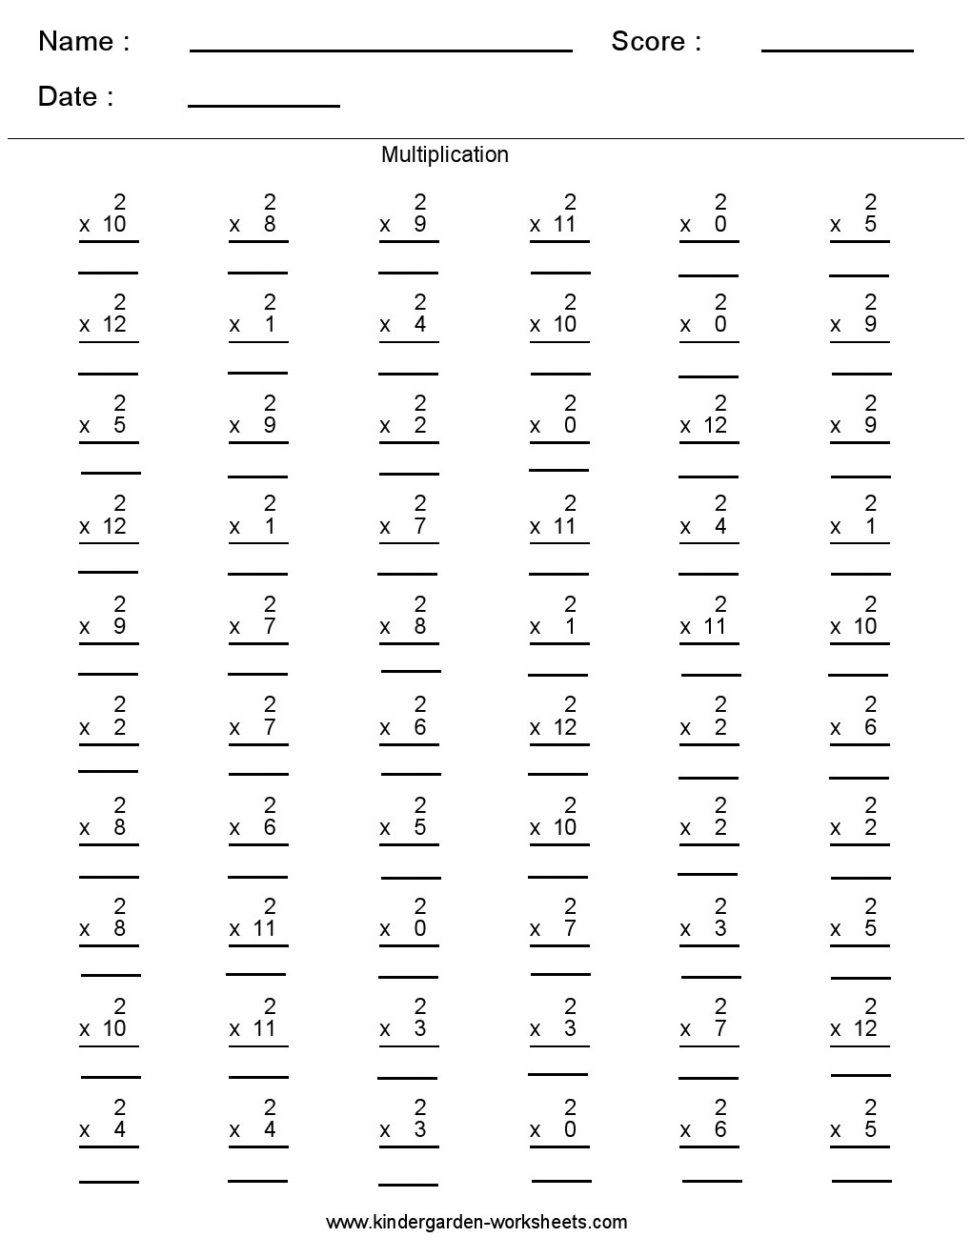 Download maths worksheets of multiplication of two